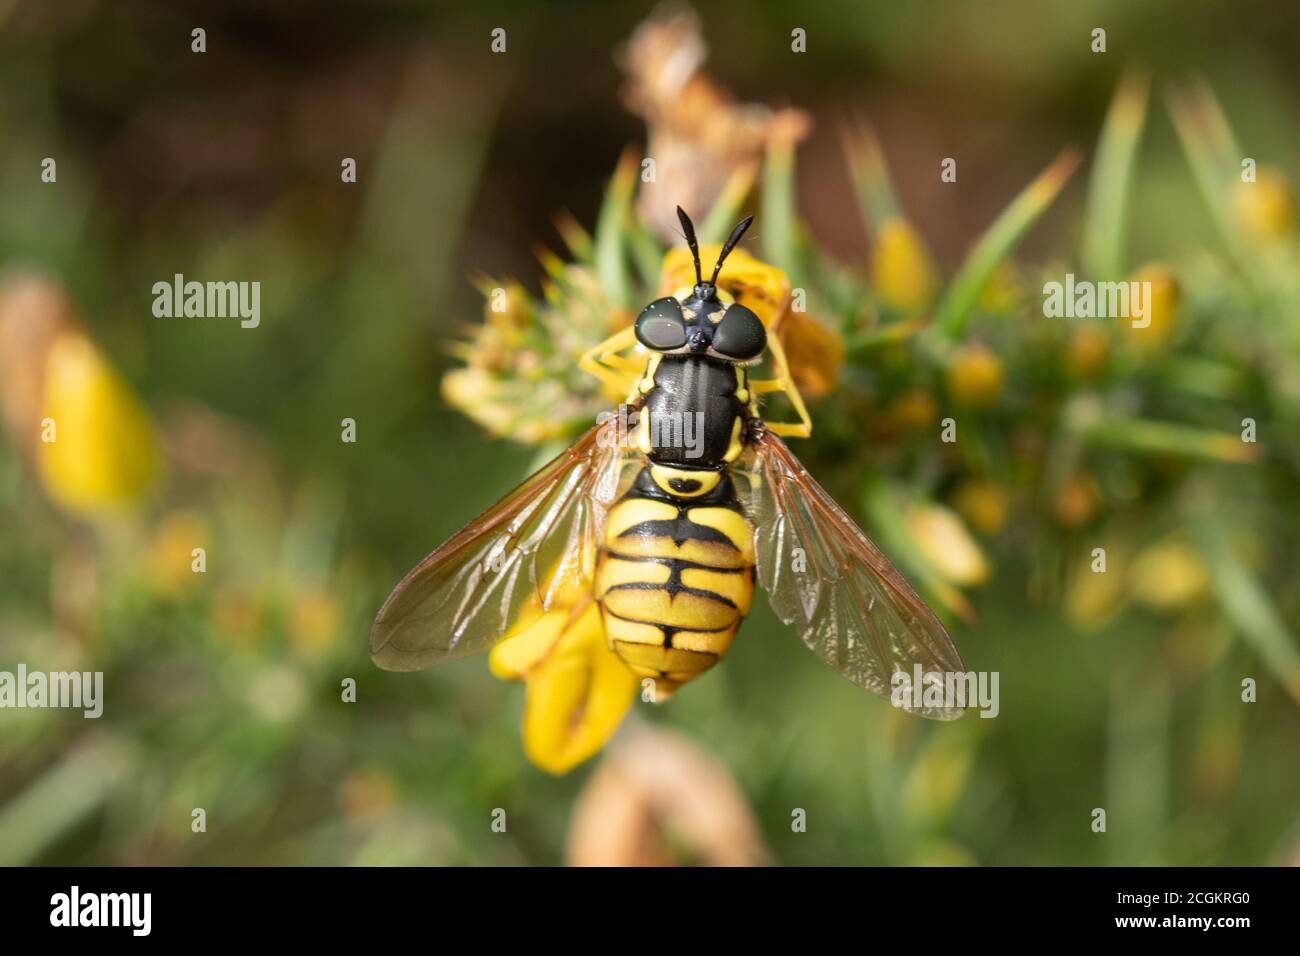 Black and yellow striped hoverfly collecting nectar from gorse flowers in Sepember, UK Stock Photo